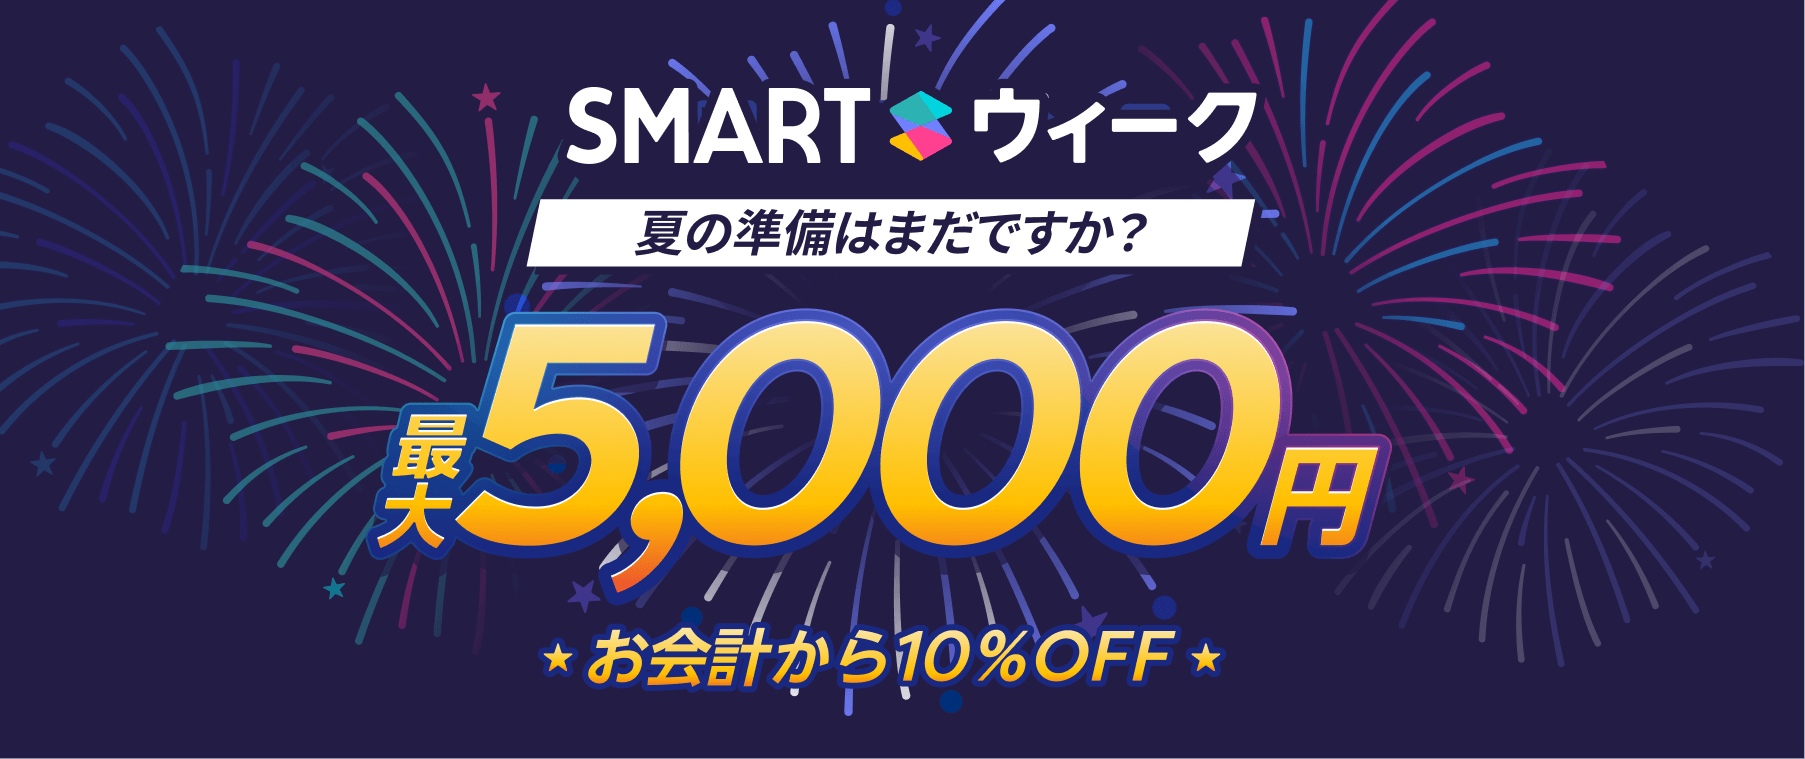 SMART PAY 【10%OFF】 SALE - .BEL store